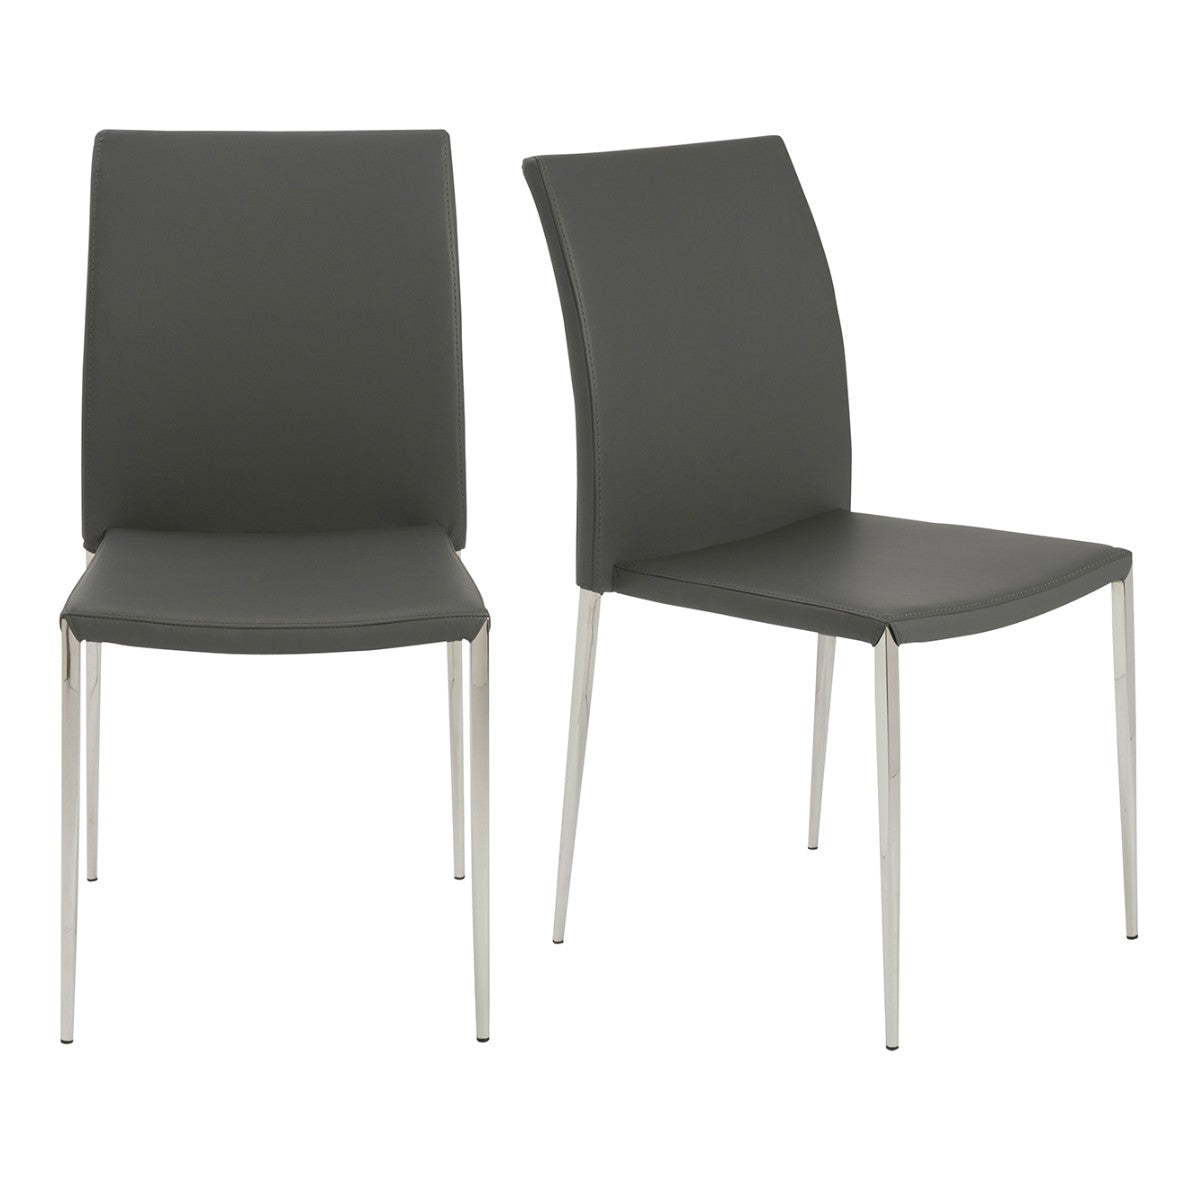 Set of Two Gray Faux Faux Leather Steel Stacking Chairs